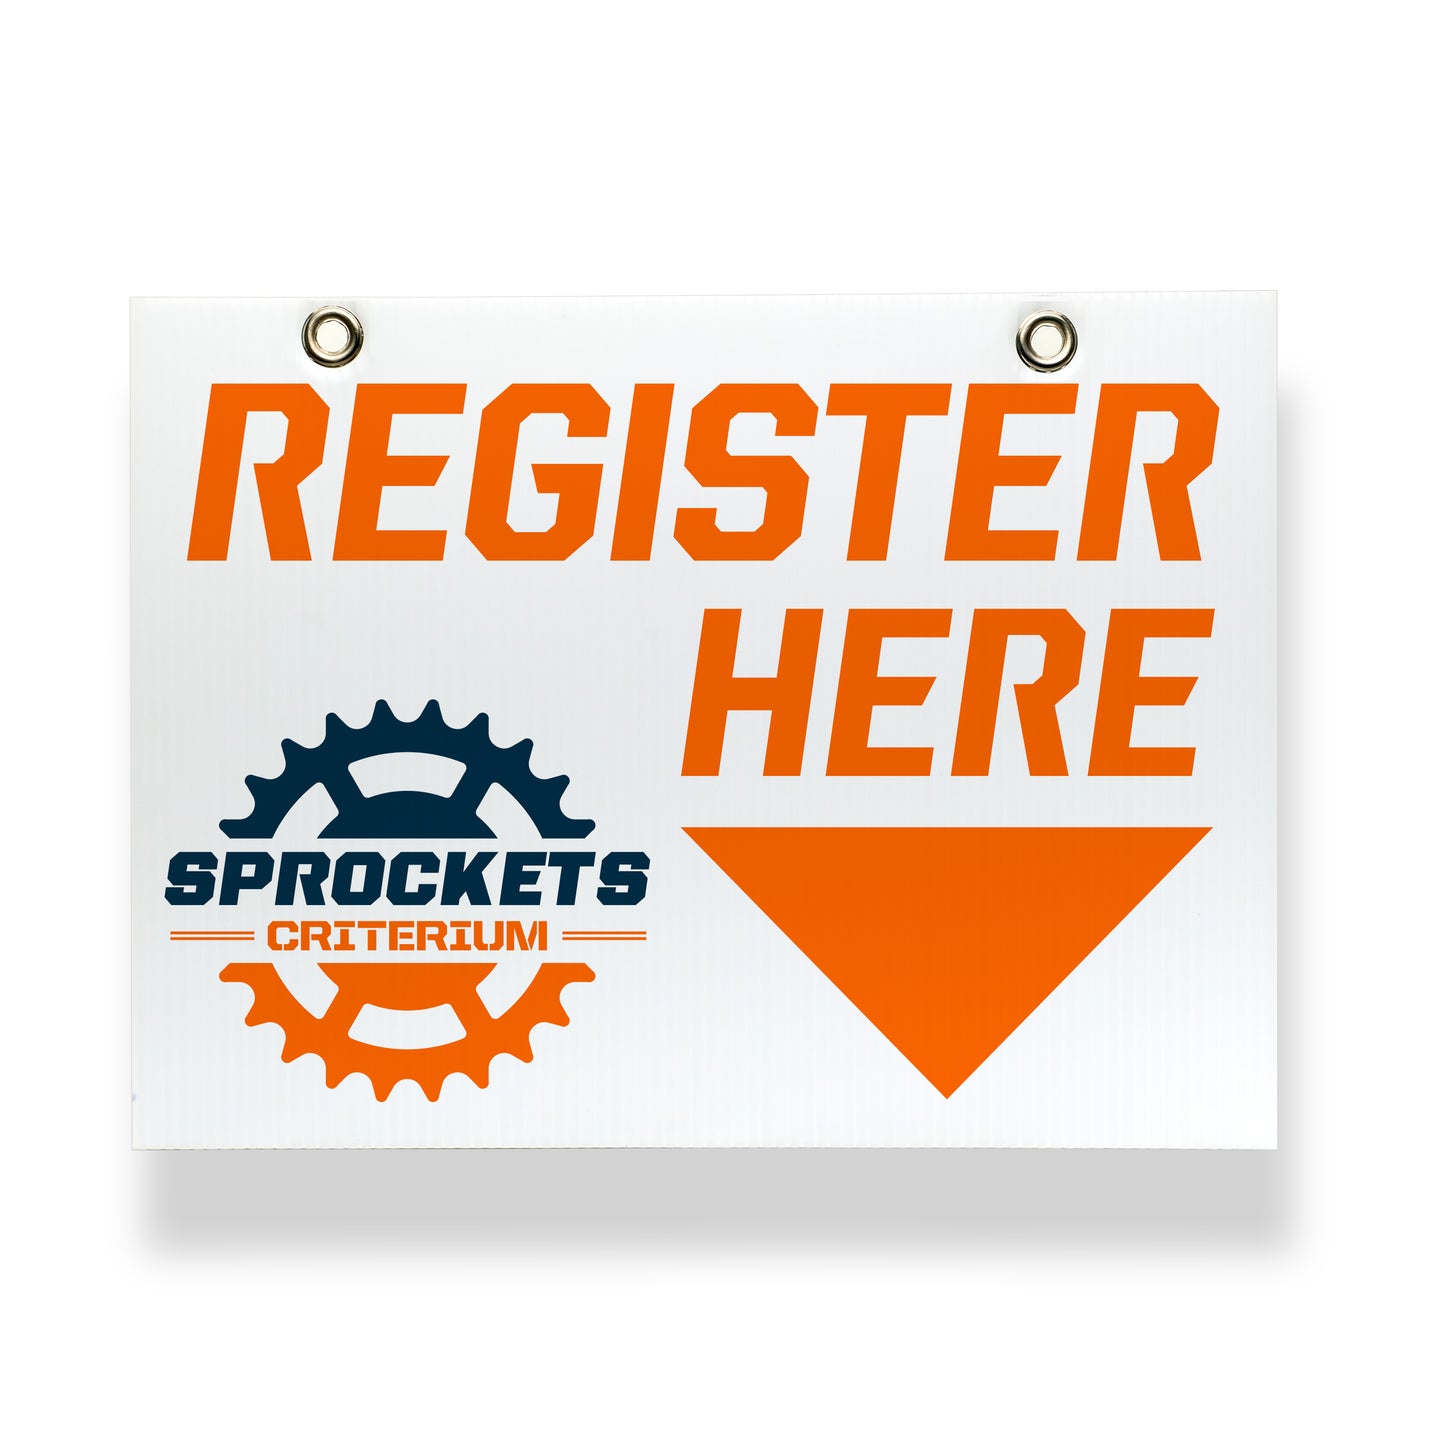 Custom coroplast sign showing bicycle race registration point